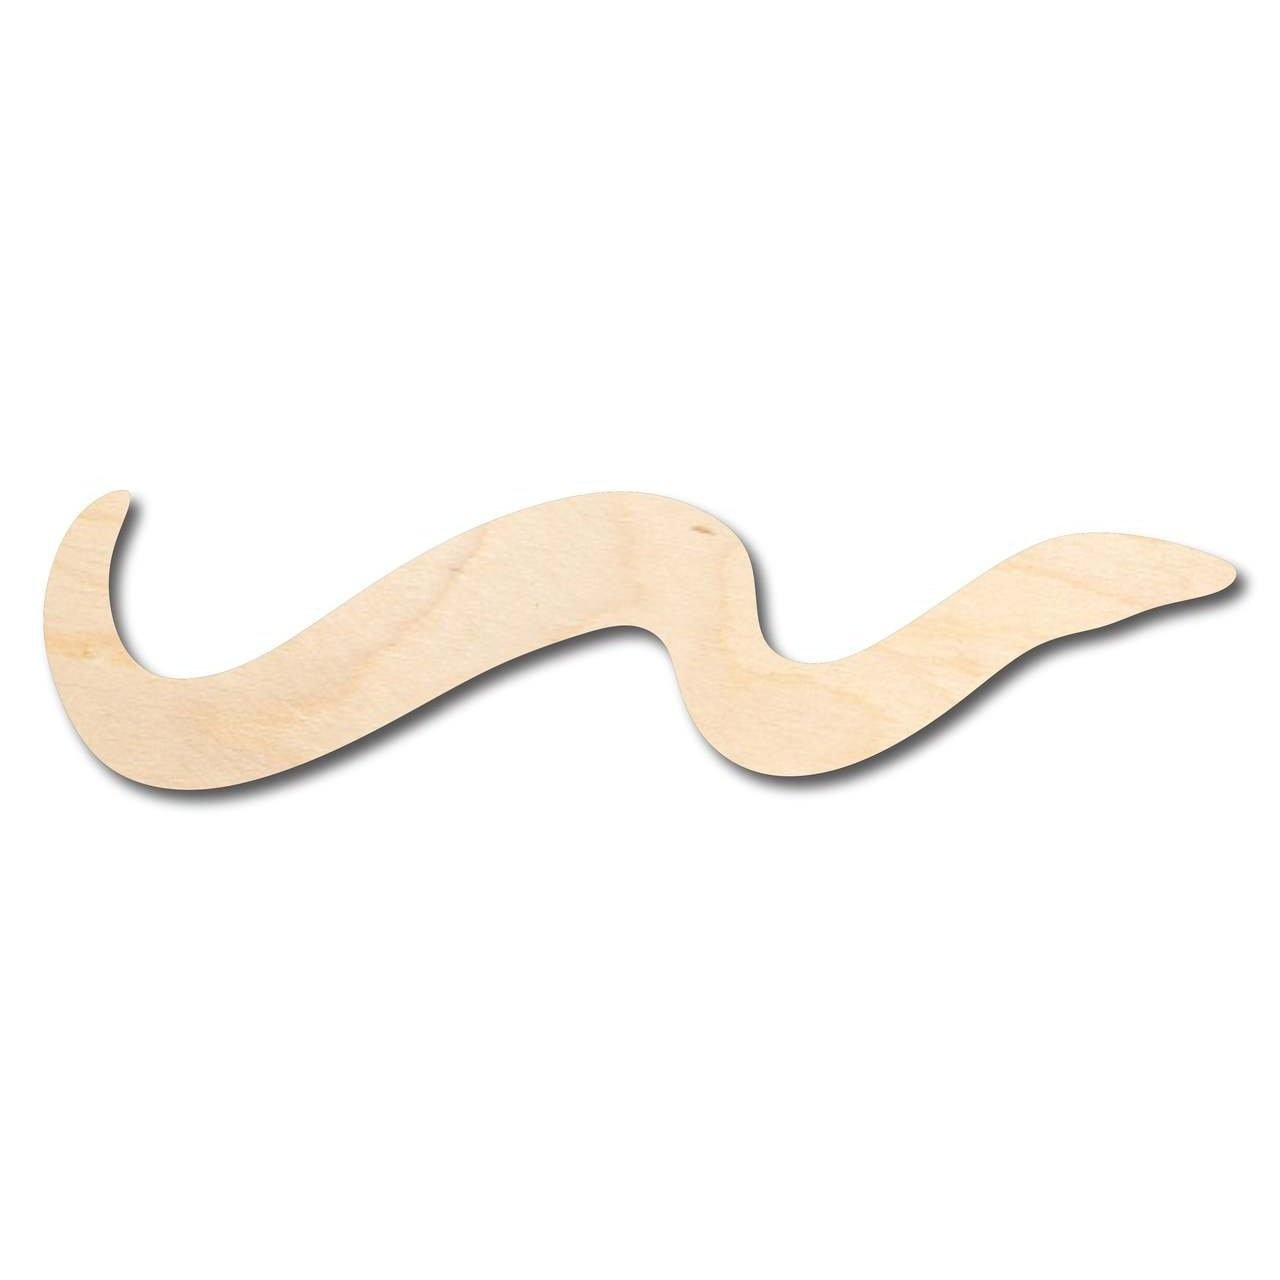 Unfinished Wooden Eel Shape - Ocean - Craft - up to 24